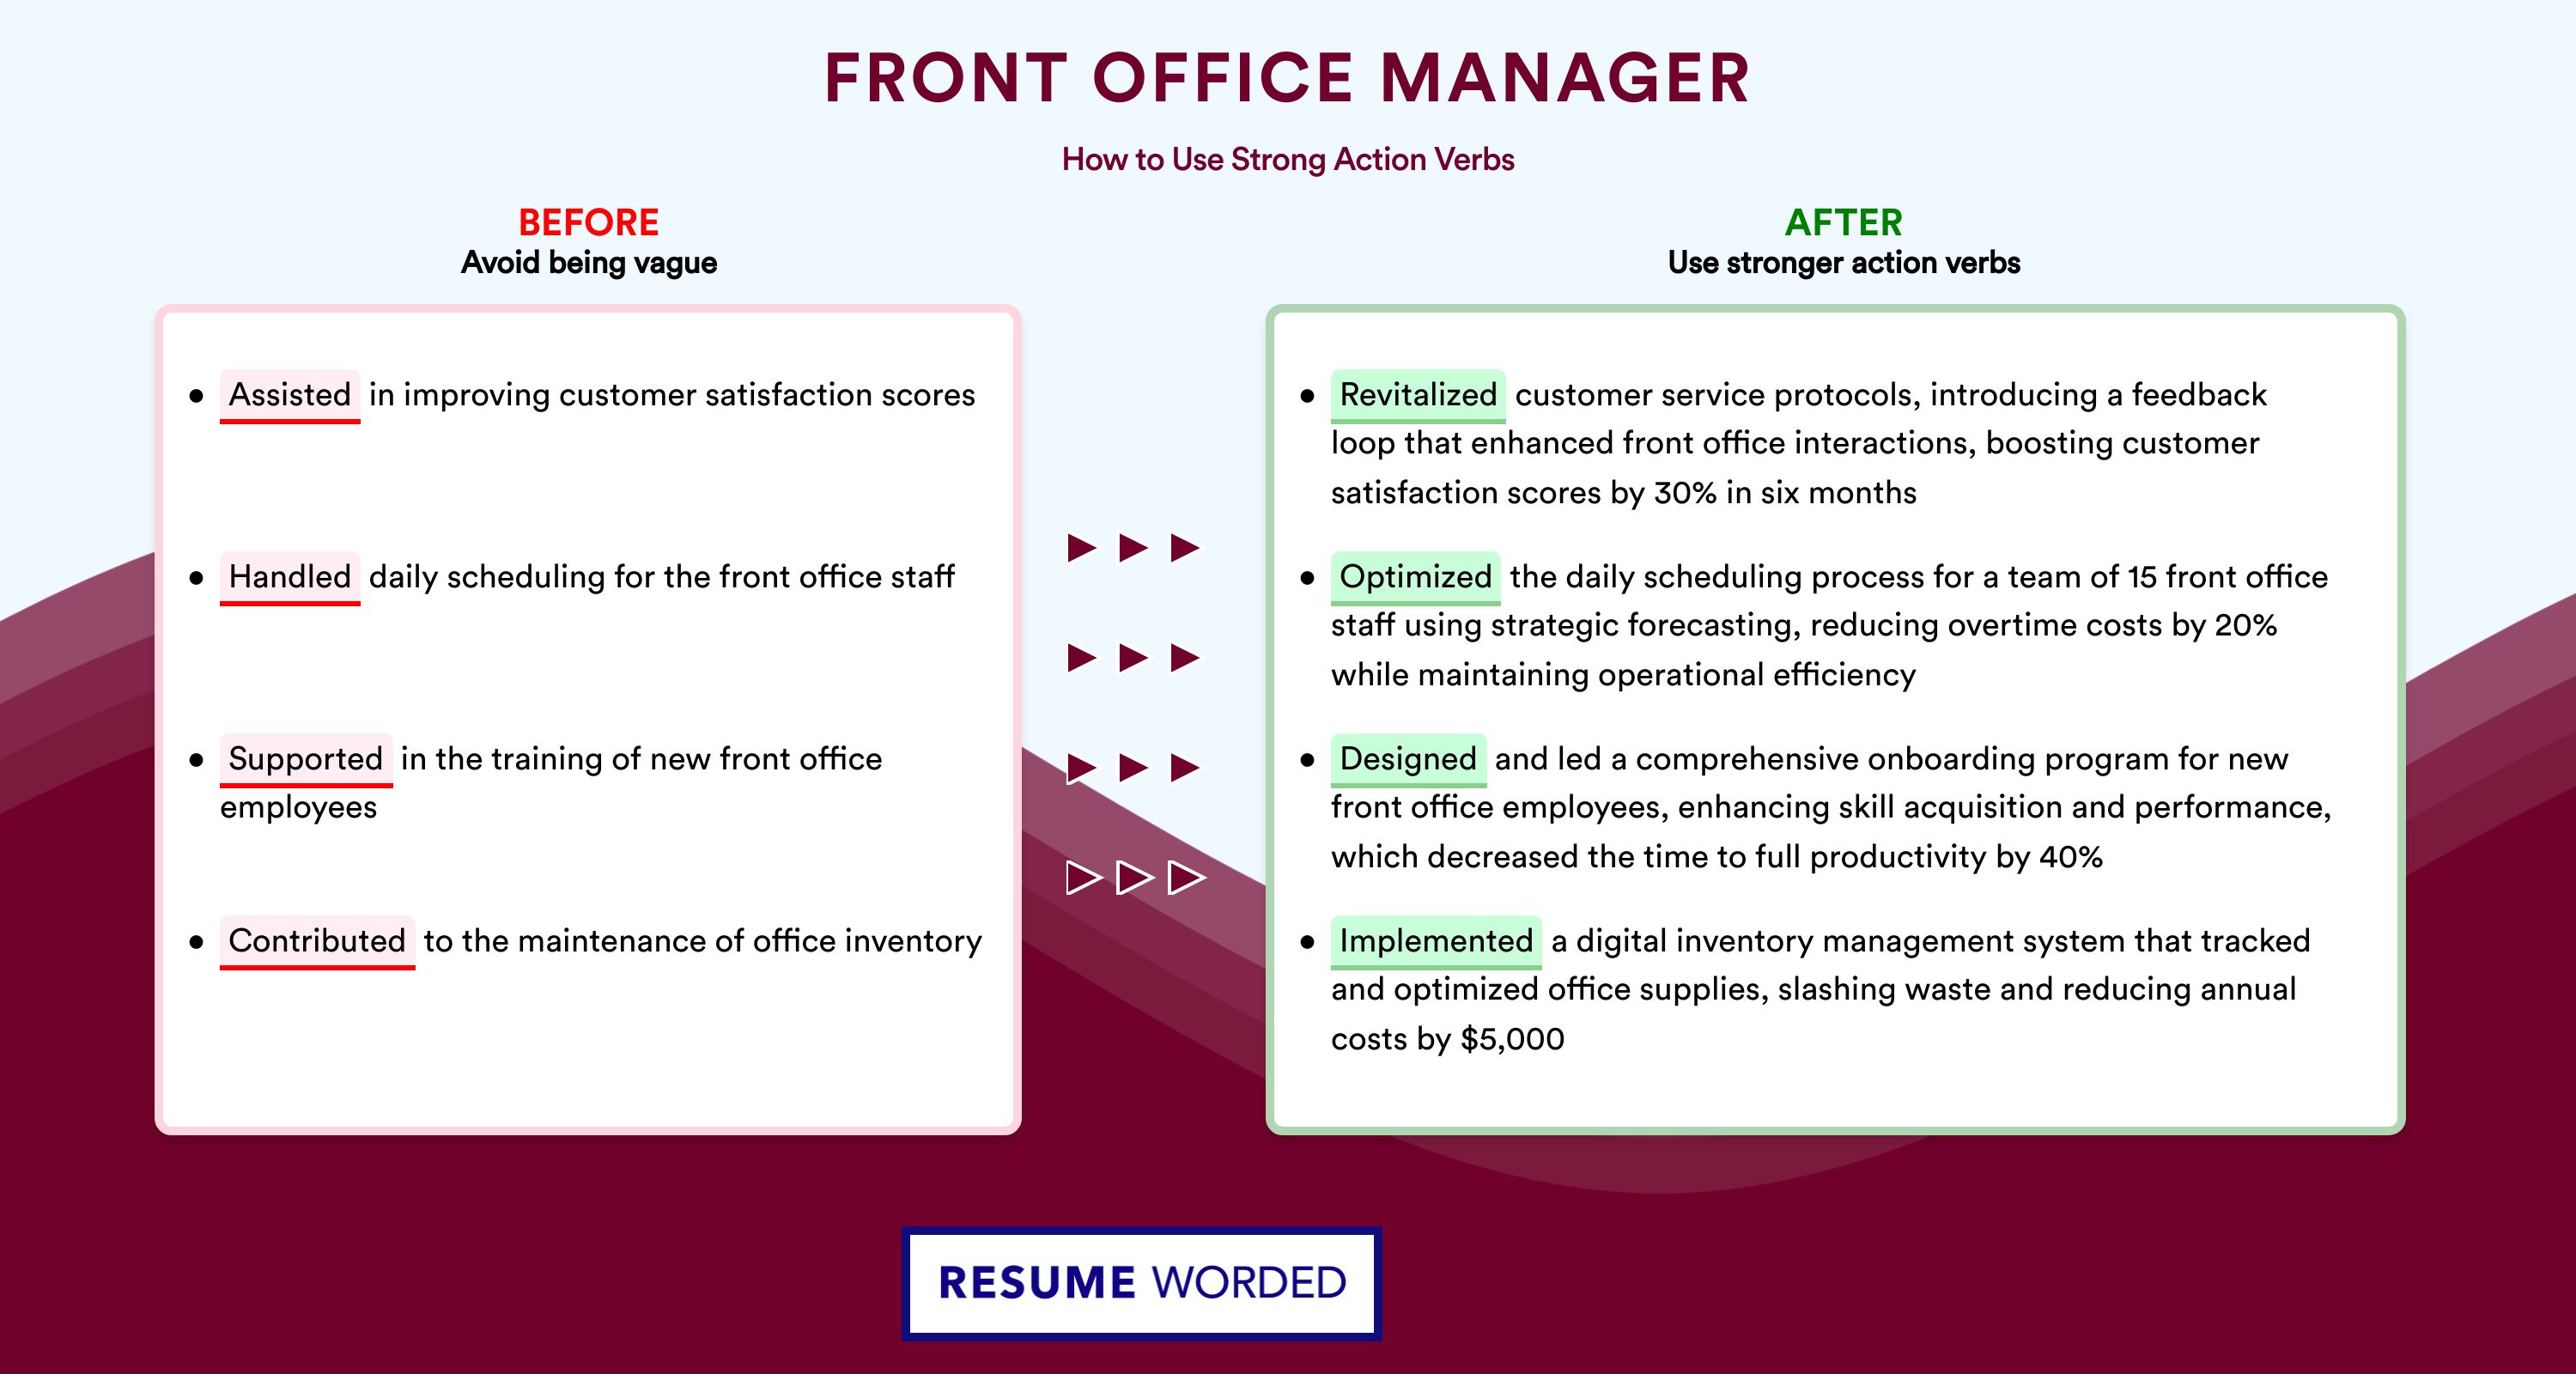 Action Verbs for Front Office Manager